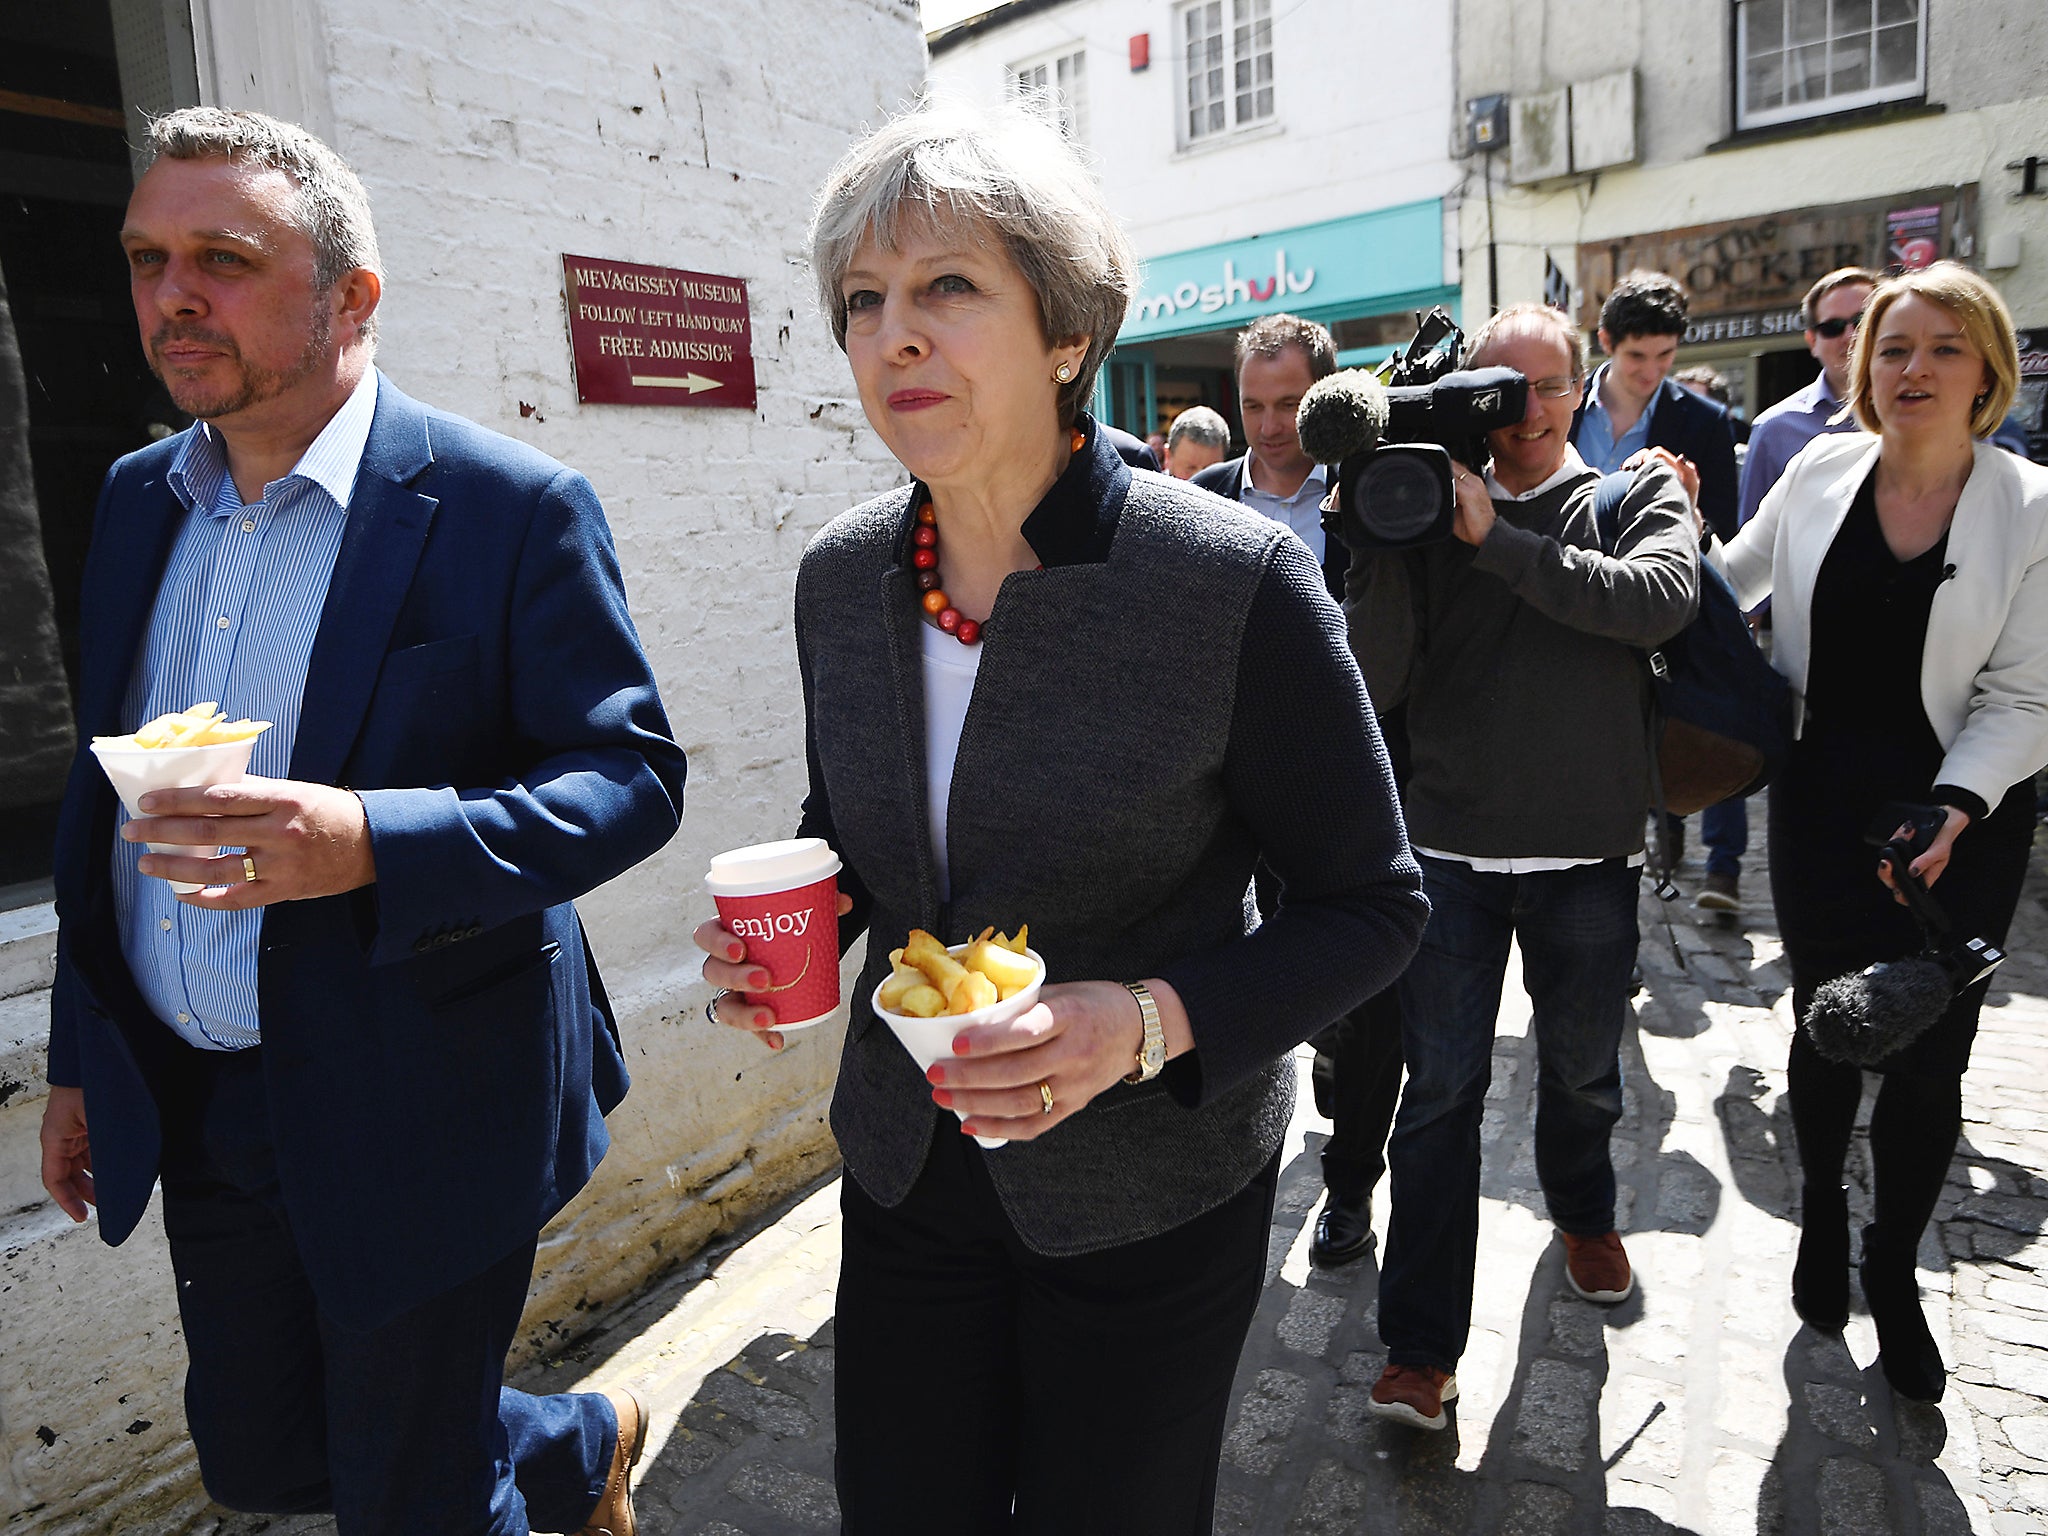 Britain's Prime Minister Theresa May is followed by journalists as she carries some chips during a campaign stop in Mevagissey, Cornwall